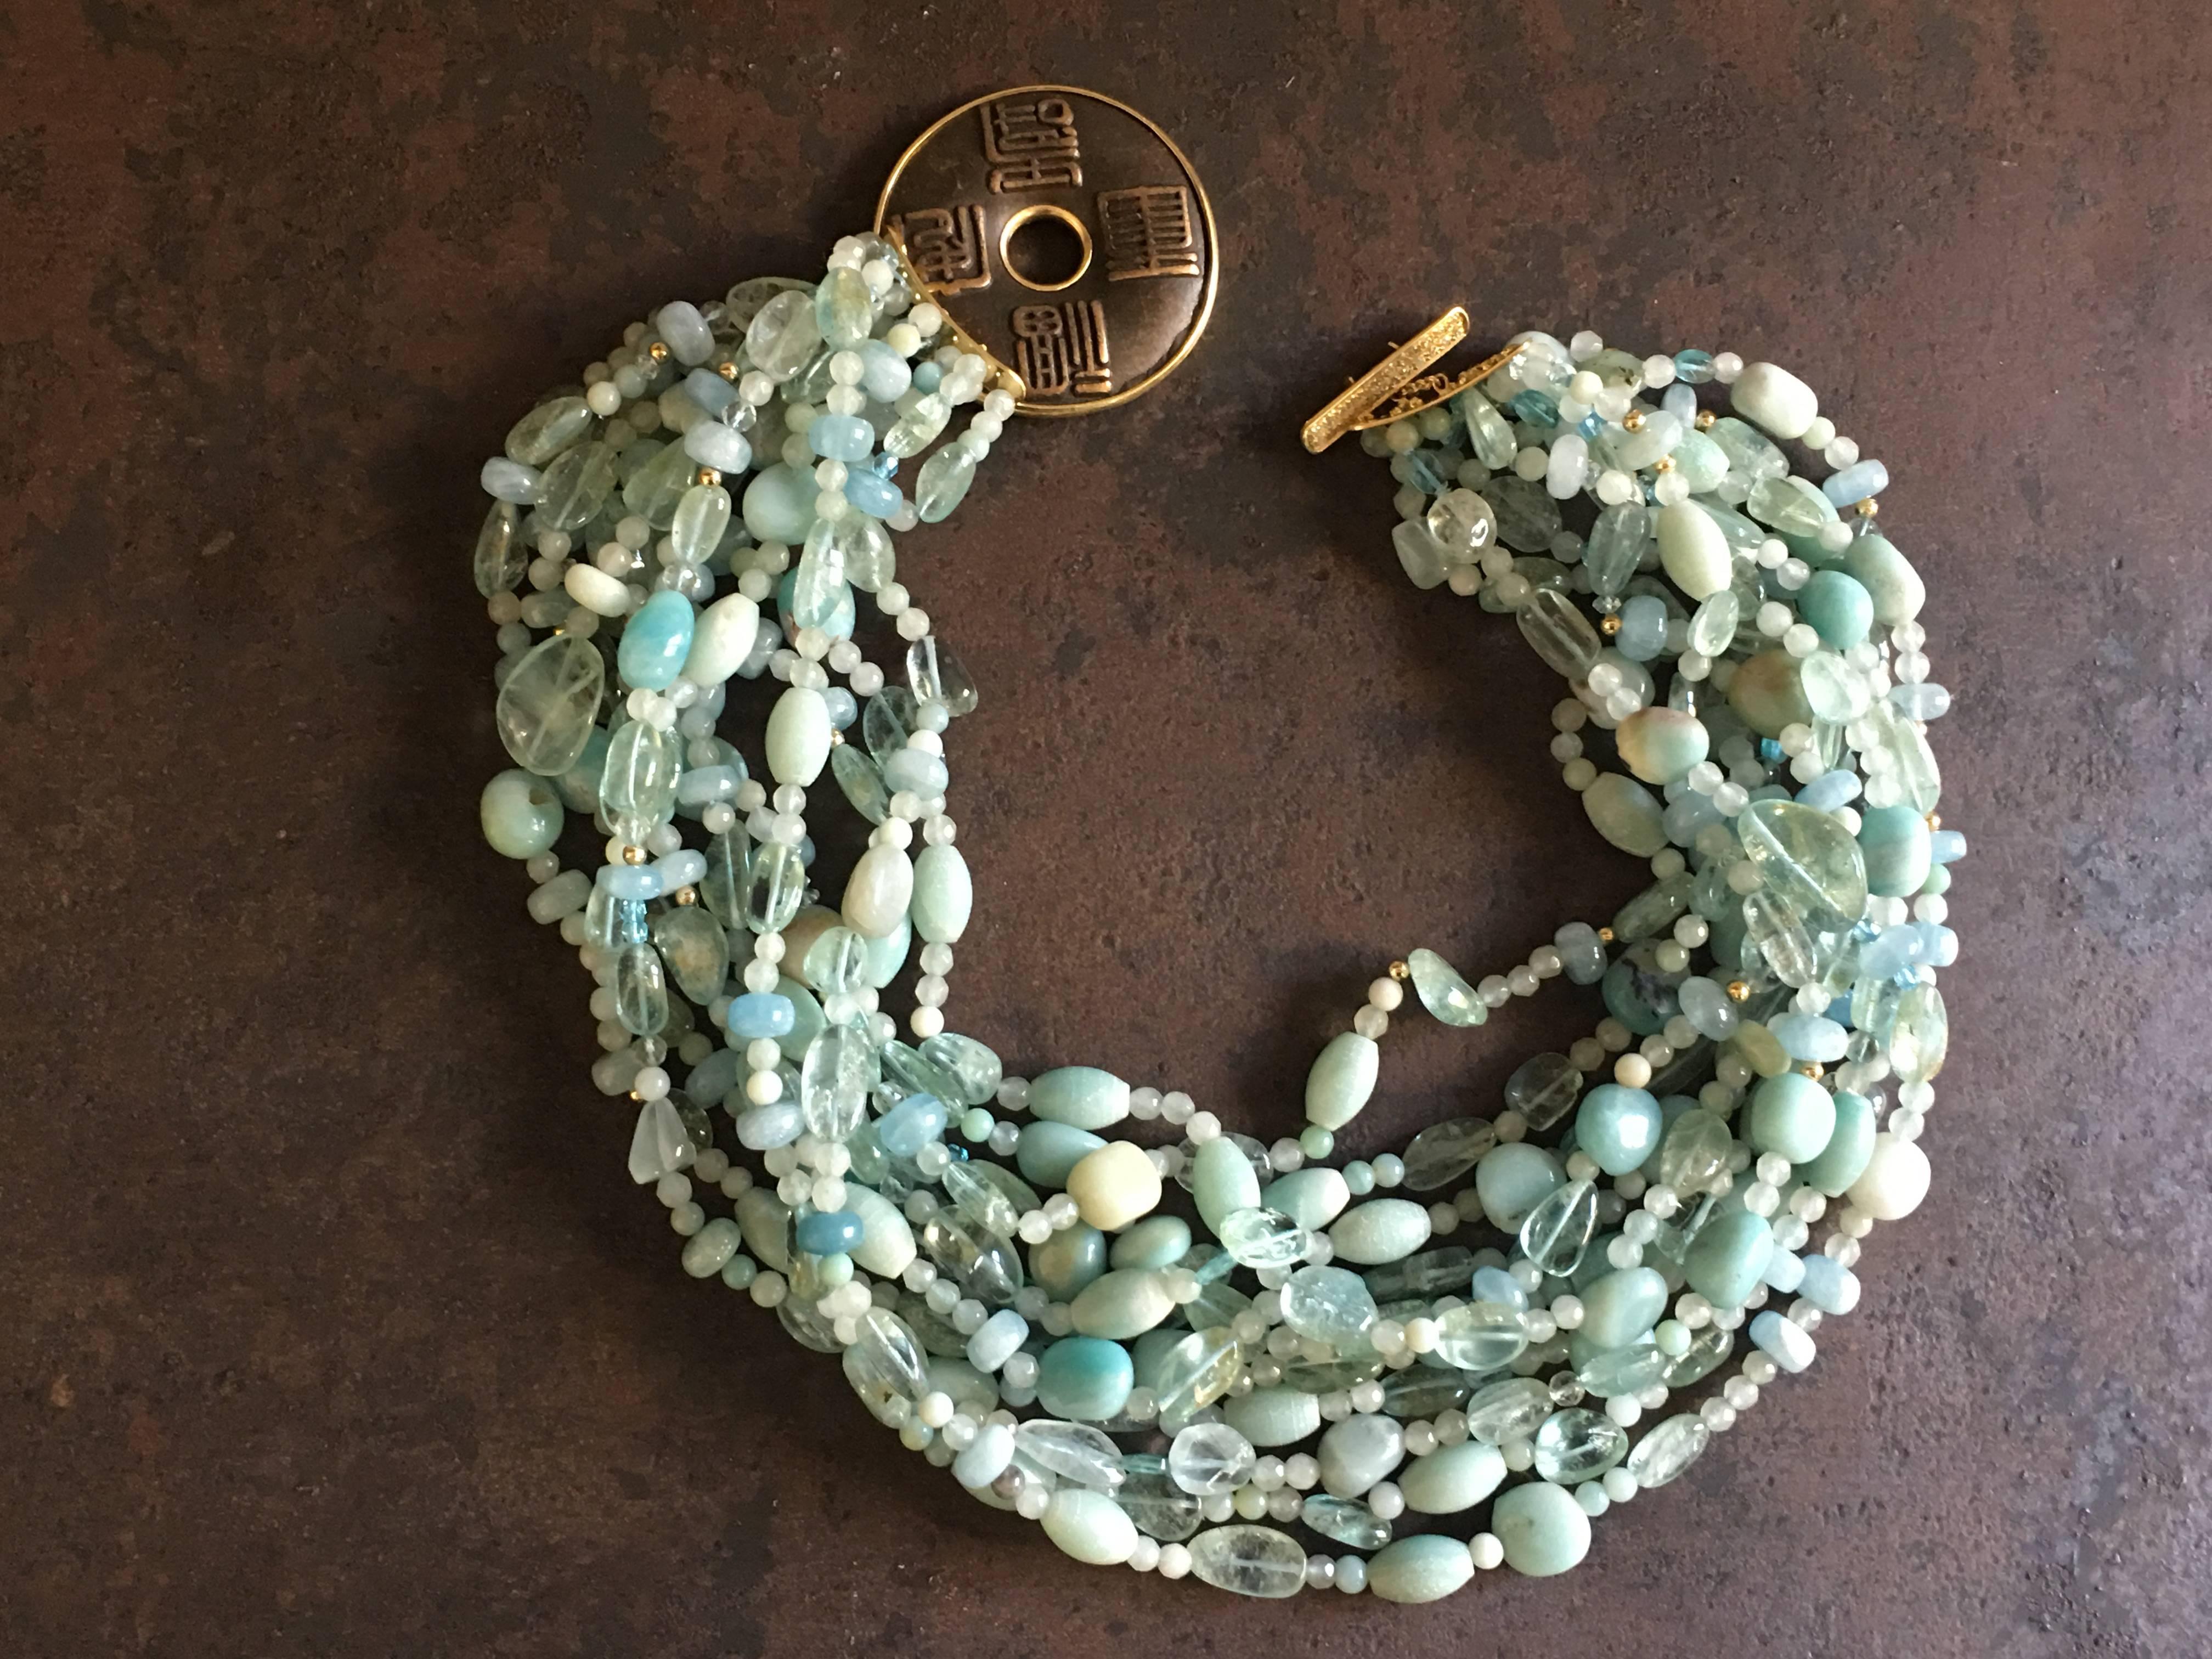 Multi string necklace with different shape and color of aquamarine stone, amazonite, gold beads.  The closing necklace was an antiques Japanese coins in bronze, refined with gold and diamonds. Length 45 cm.
All jewelry is new and has never been